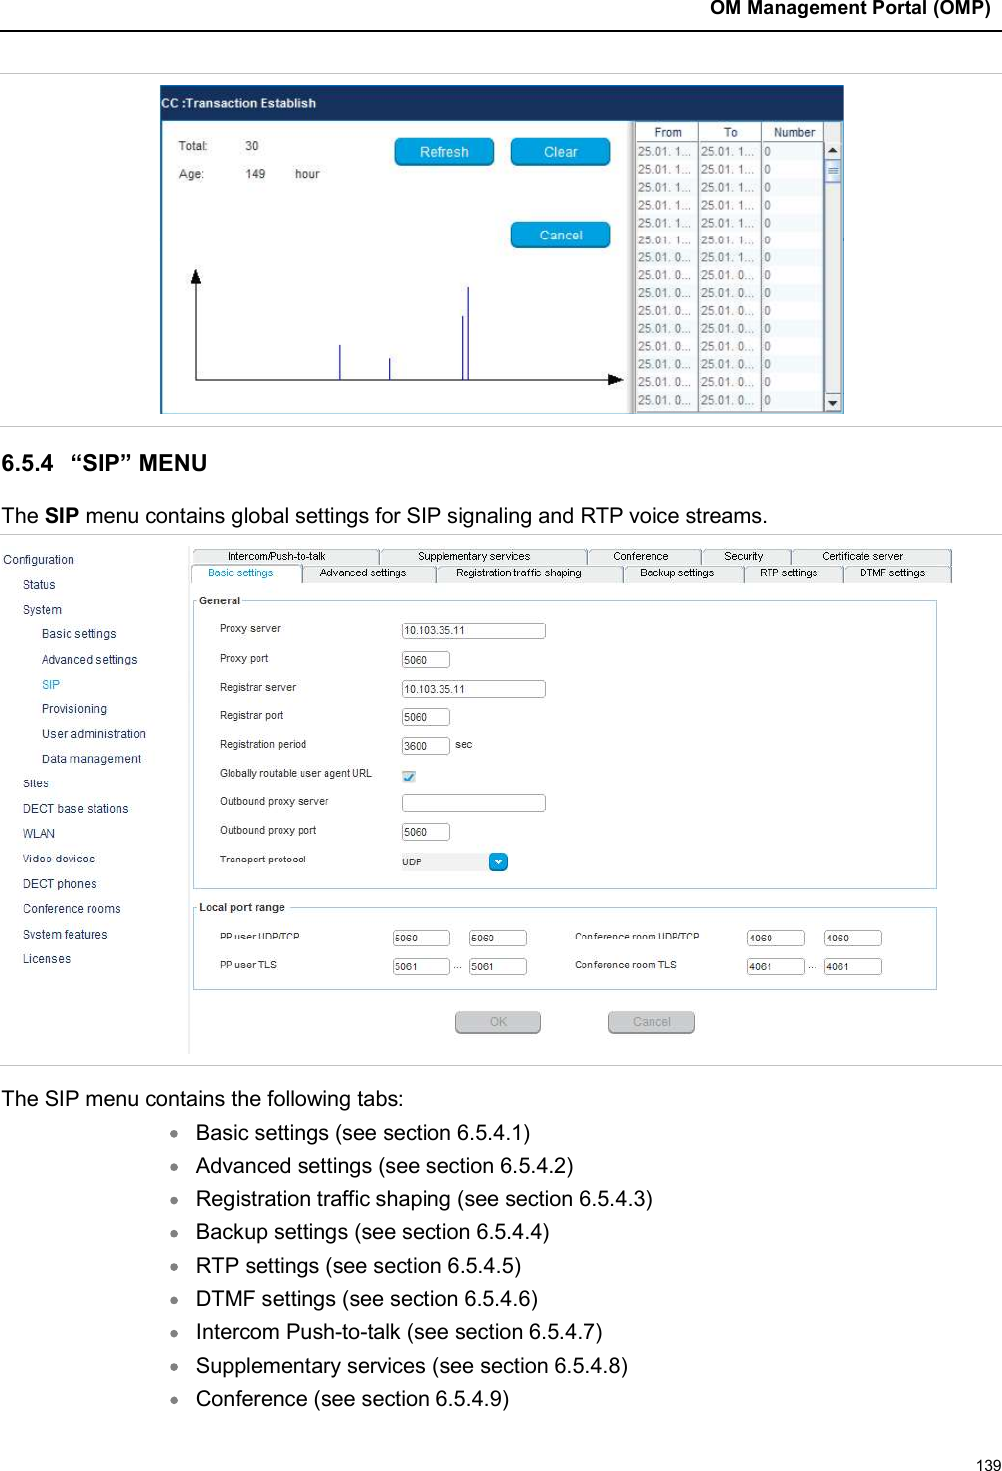 OM Management Portal (OMP)1396.5.4 “SIP” MENUThe SIP menu contains global settings for SIP signaling and RTP voice streams.The SIP menu contains the following tabs:Basic settings (see section 6.5.4.1)Advanced settings (see section 6.5.4.2)Registration traffic shaping (see section 6.5.4.3)Backup settings (see section 6.5.4.4)RTP settings (see section 6.5.4.5)DTMF settings (see section 6.5.4.6)Intercom Push-to-talk (see section 6.5.4.7)Supplementary services (see section 6.5.4.8)Conference (see section 6.5.4.9)